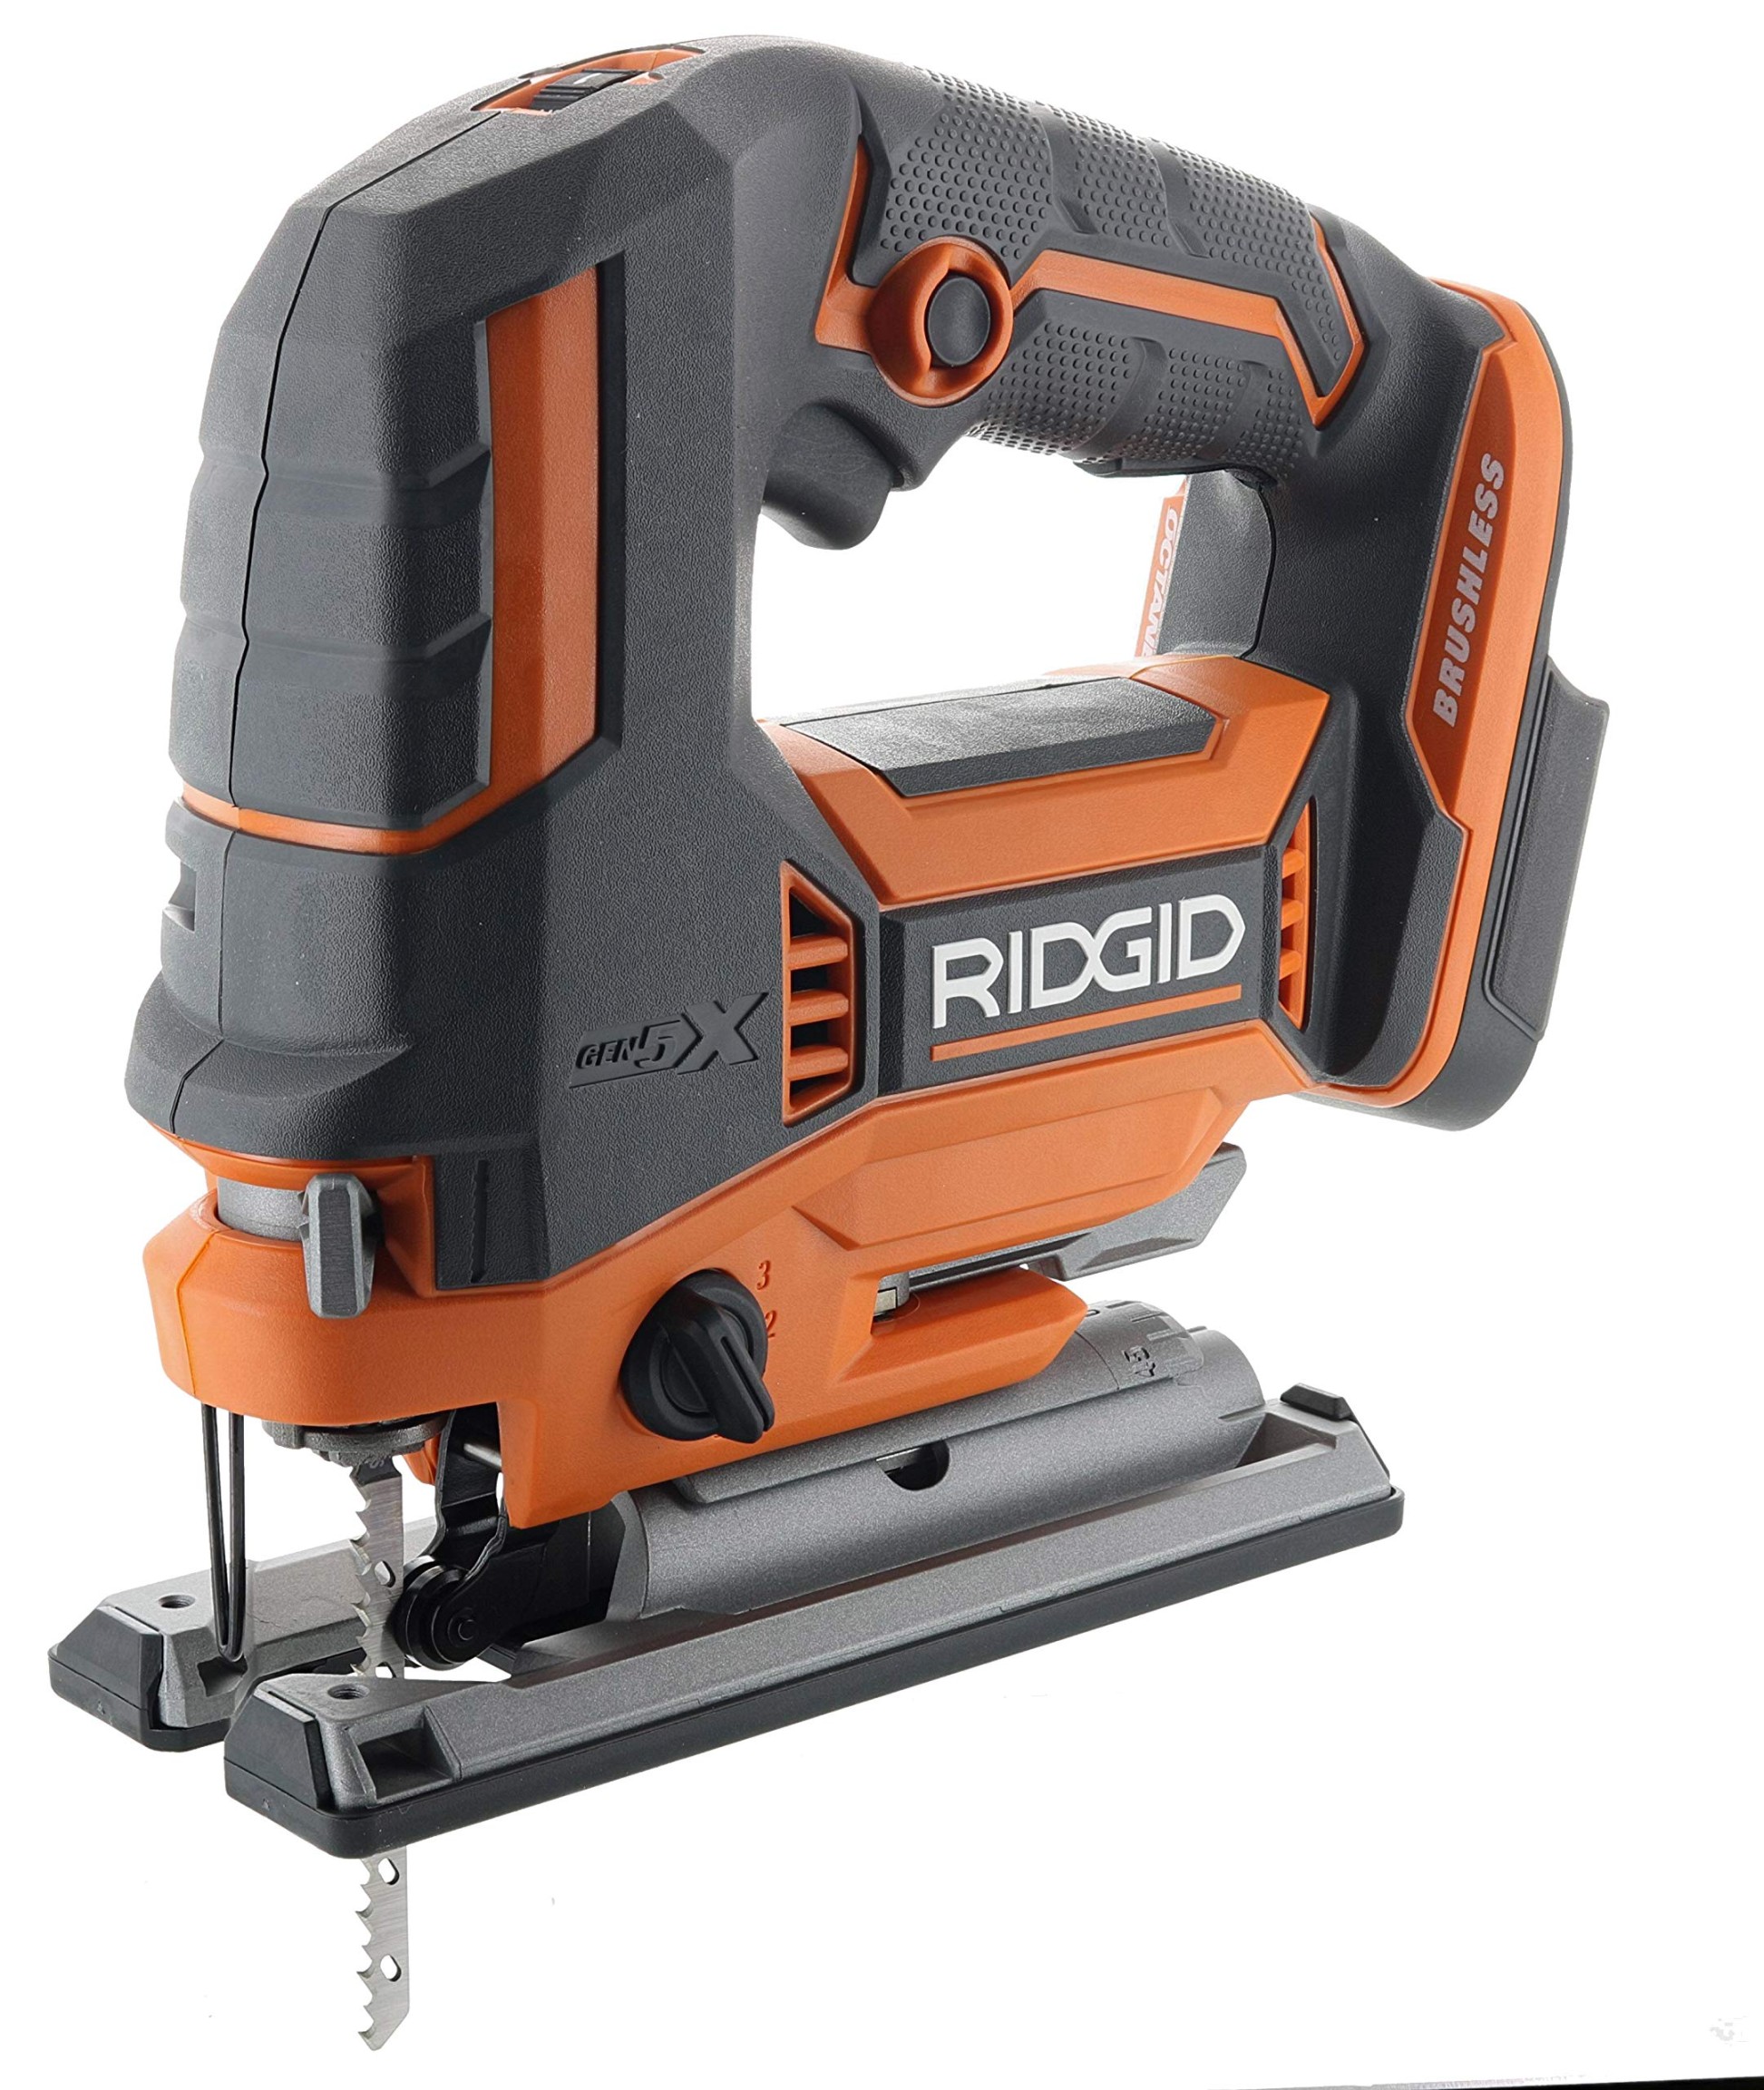 octane-brushless-v-jig-saw-jig-saws-amazon-canada Ridgid Jigsaw Review: Power and Precision for Demanding Cuts picture